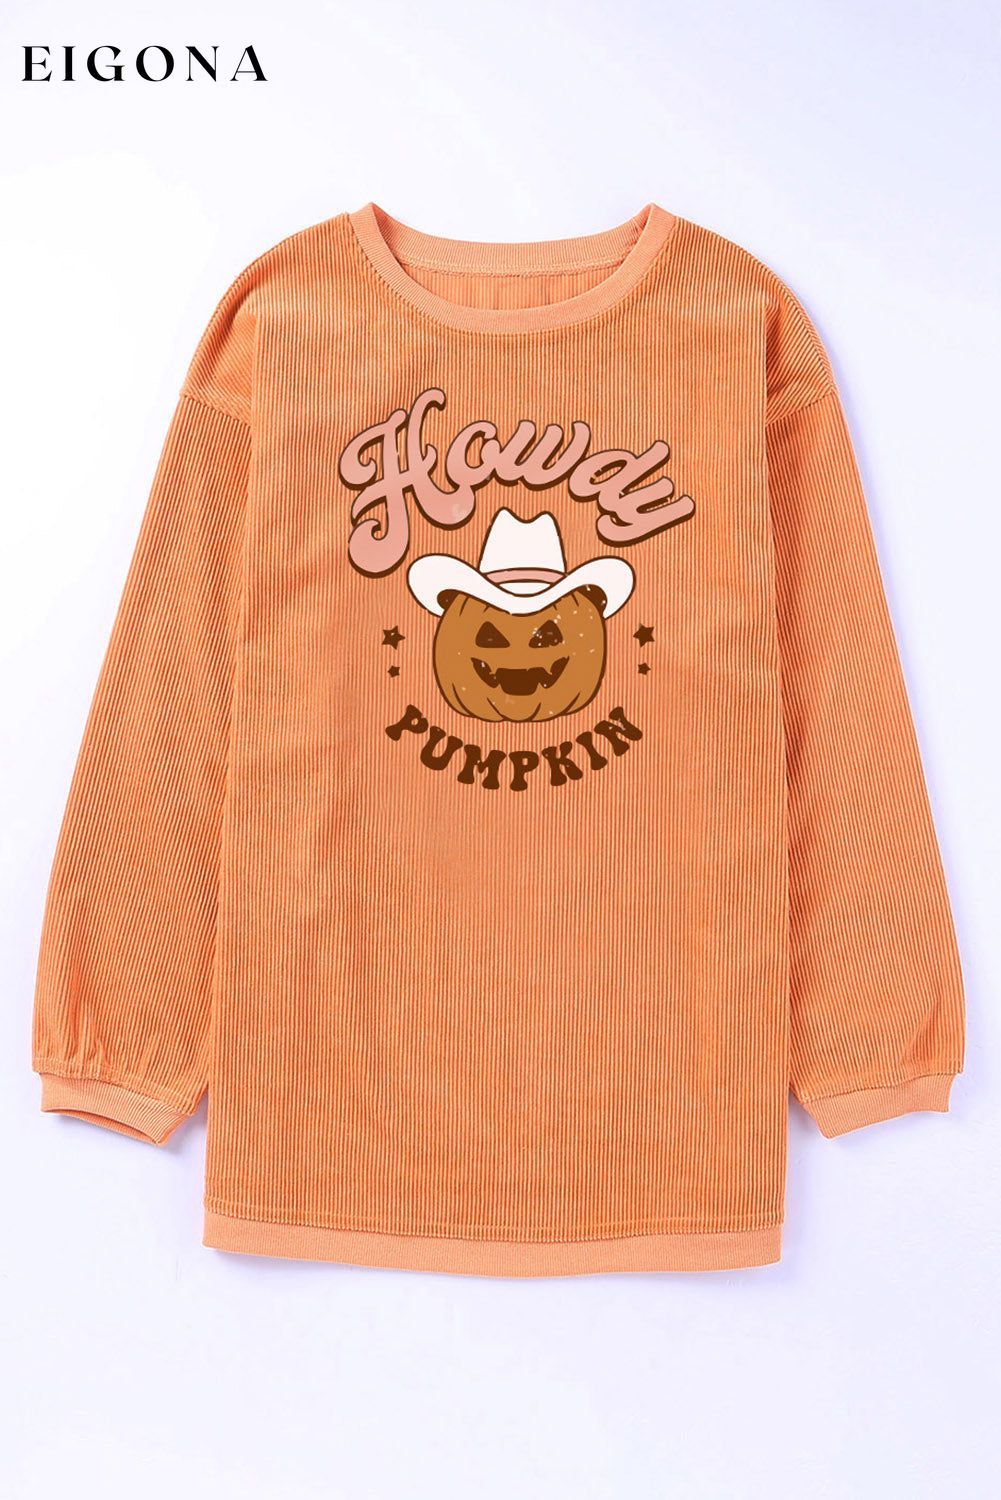 HOWDY Pumpkin Graphic Ribbed Sweatshirt clothes Ship From Overseas shirt sweatshirt SYNZ top trend